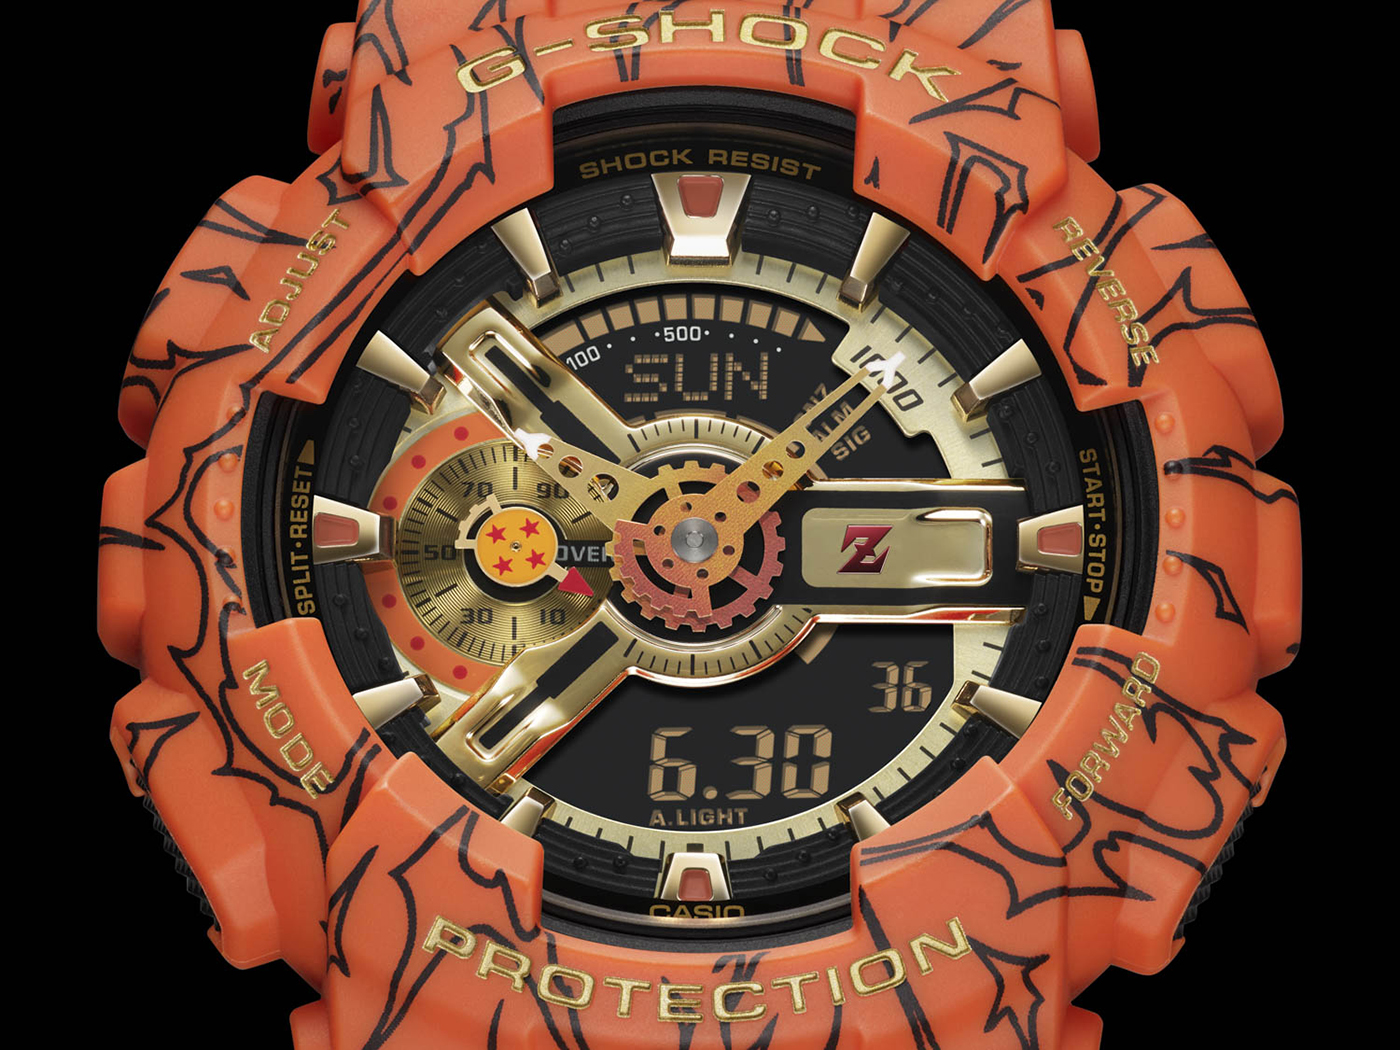 Casio Teams Up With Dragon Ball Z For Limited-Edition G-Shock Dragon Ball GA110 Watch Releases 